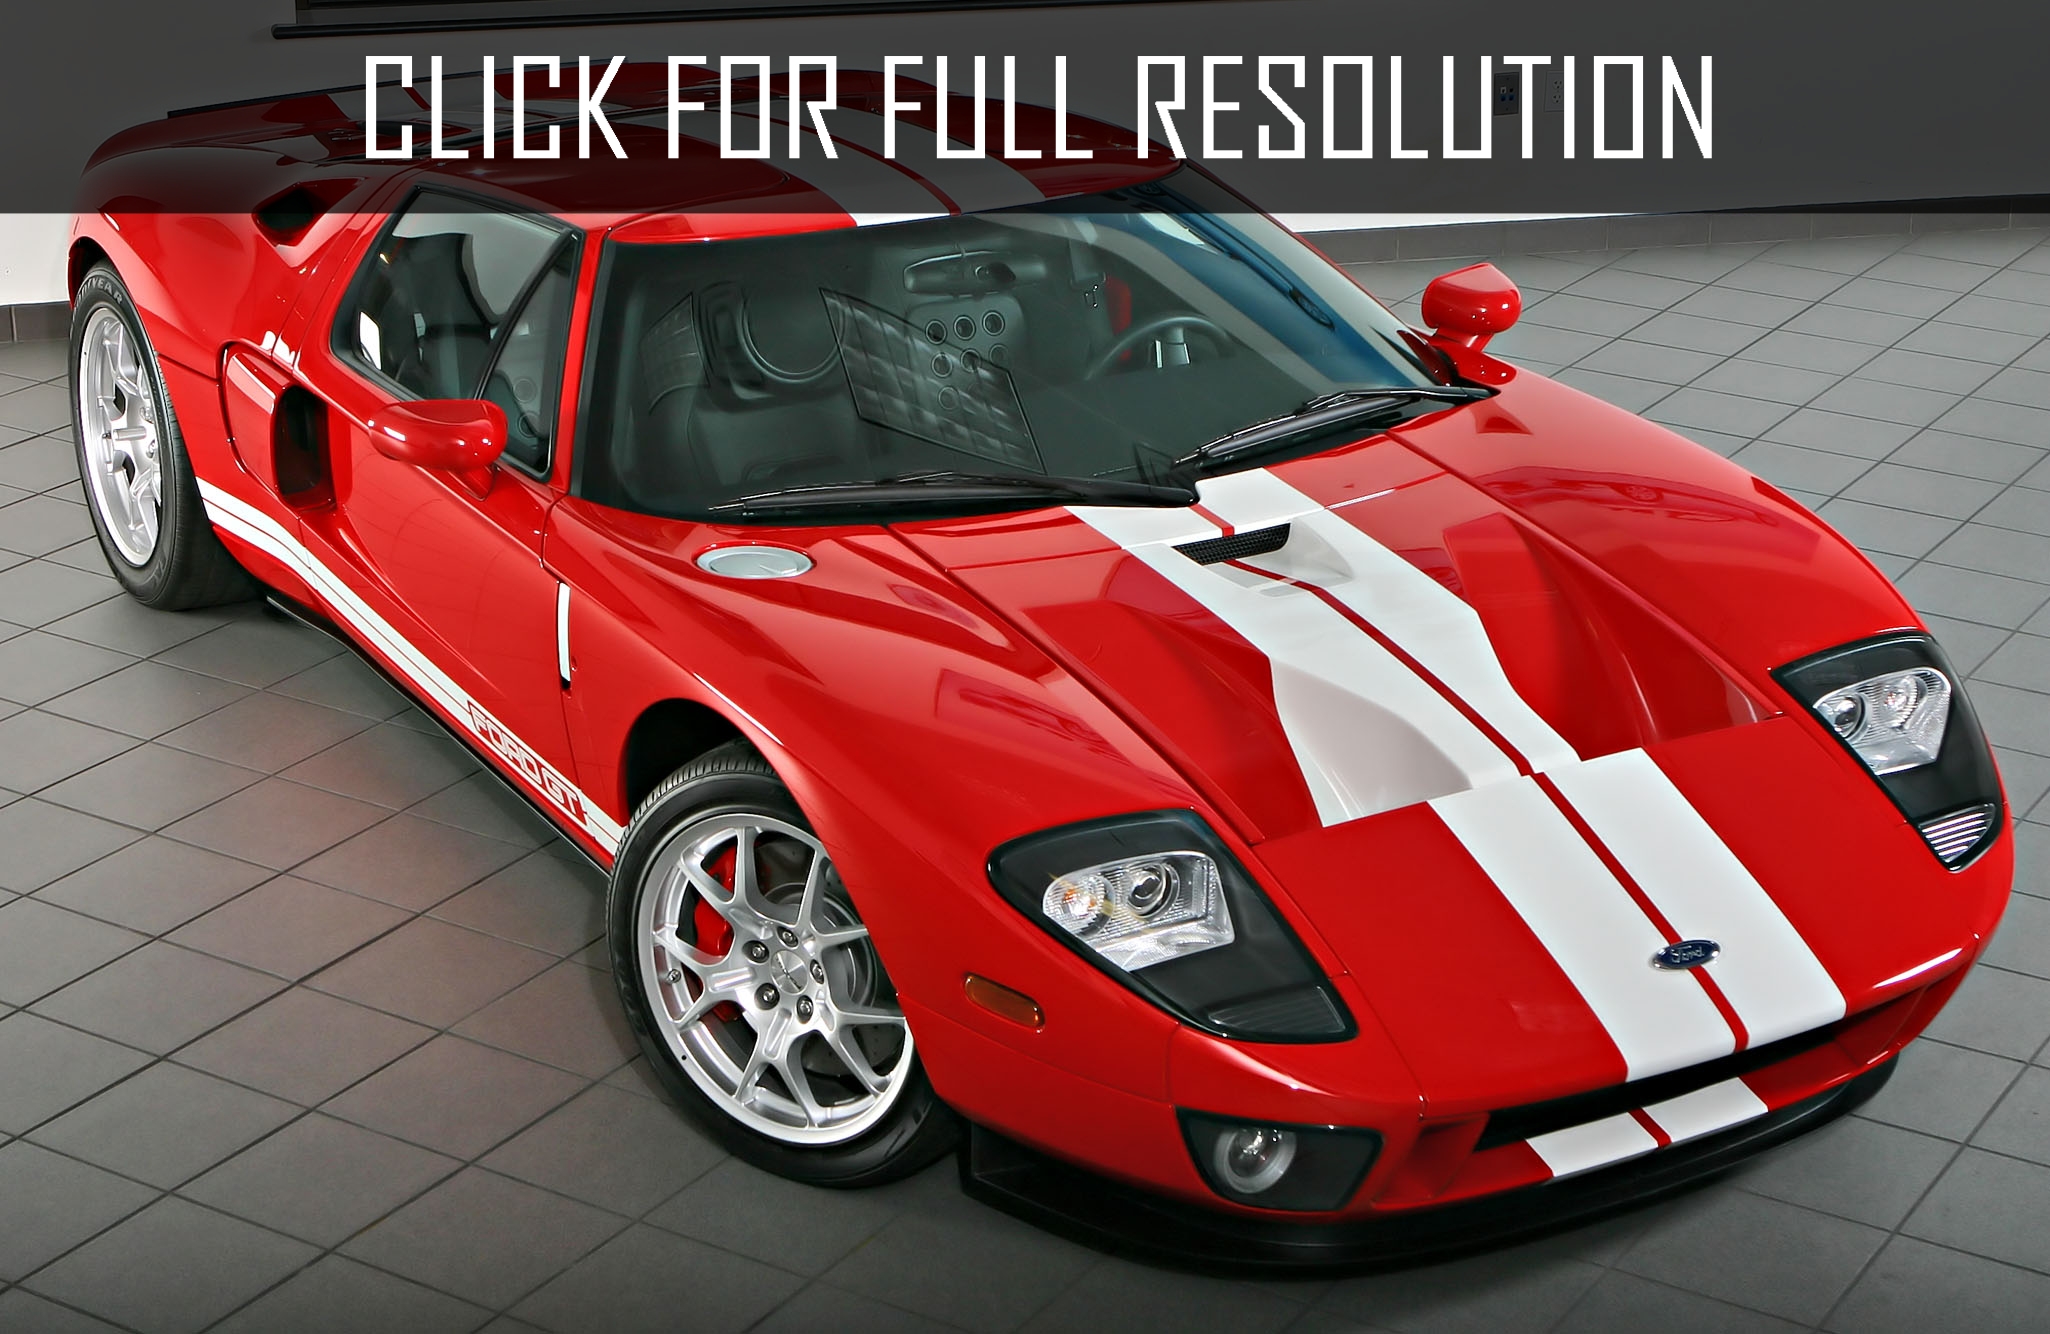 2005 Ford Gt